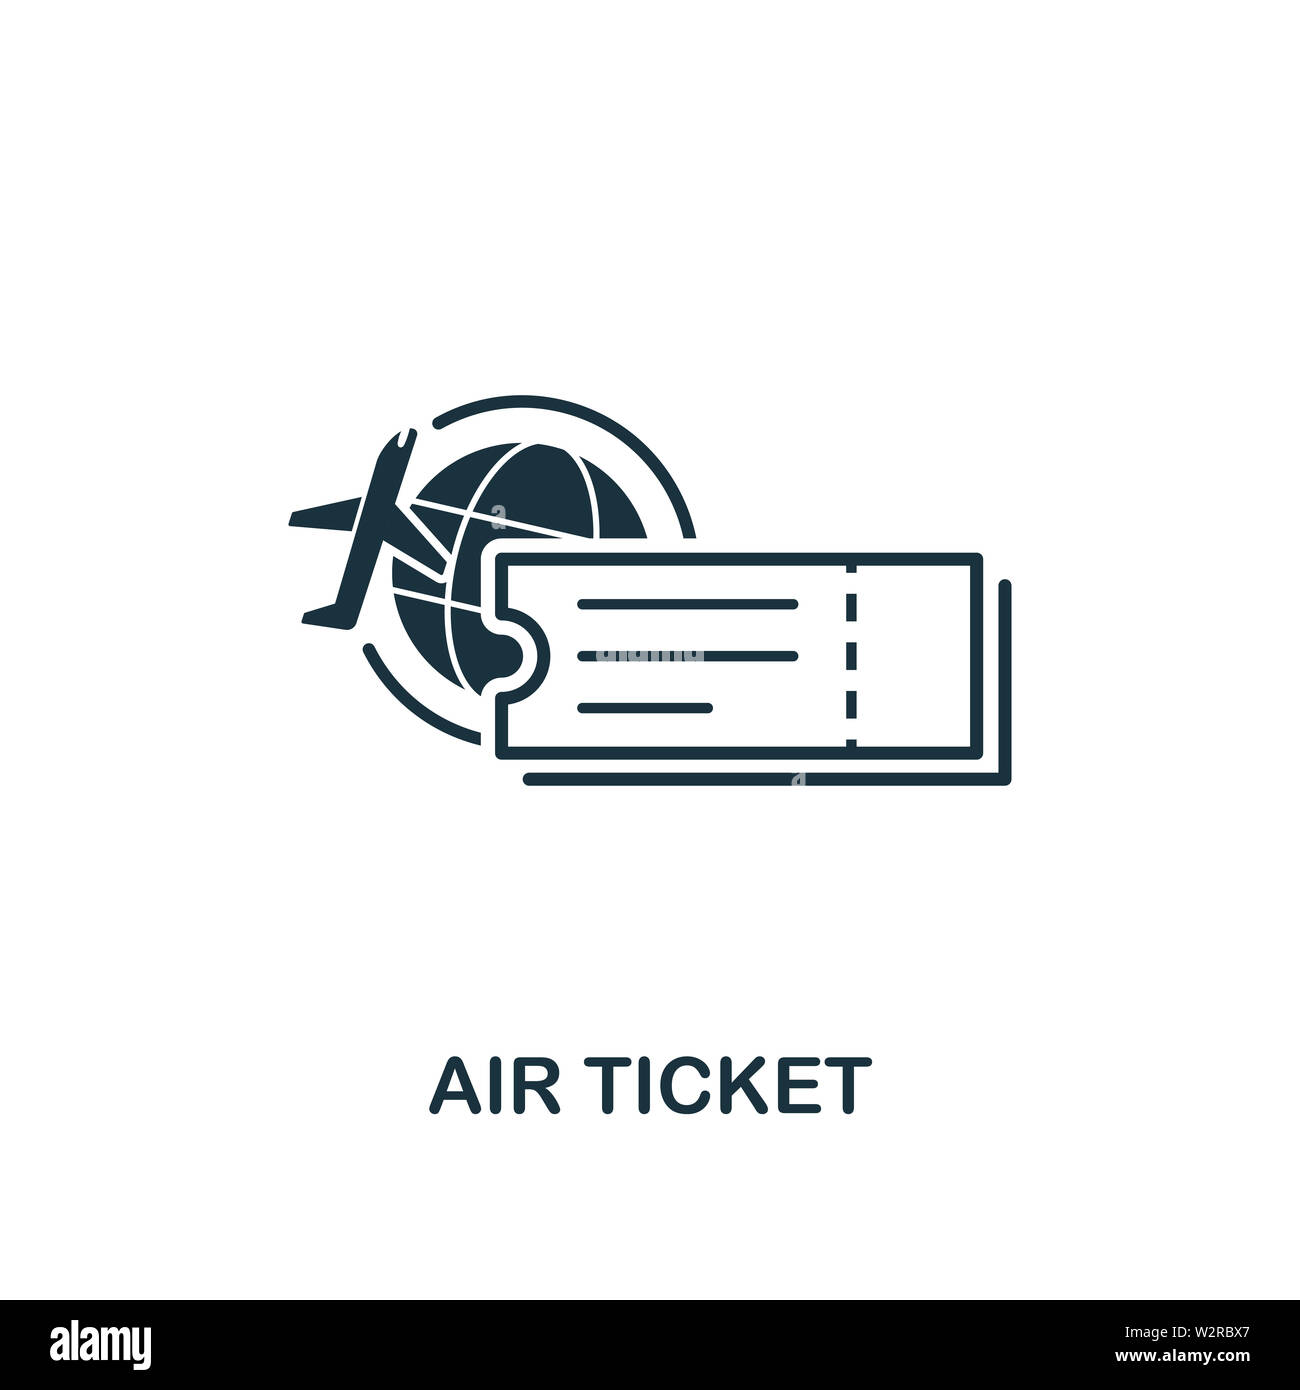 Print boarding pass Cut Out Stock Images Pictures -